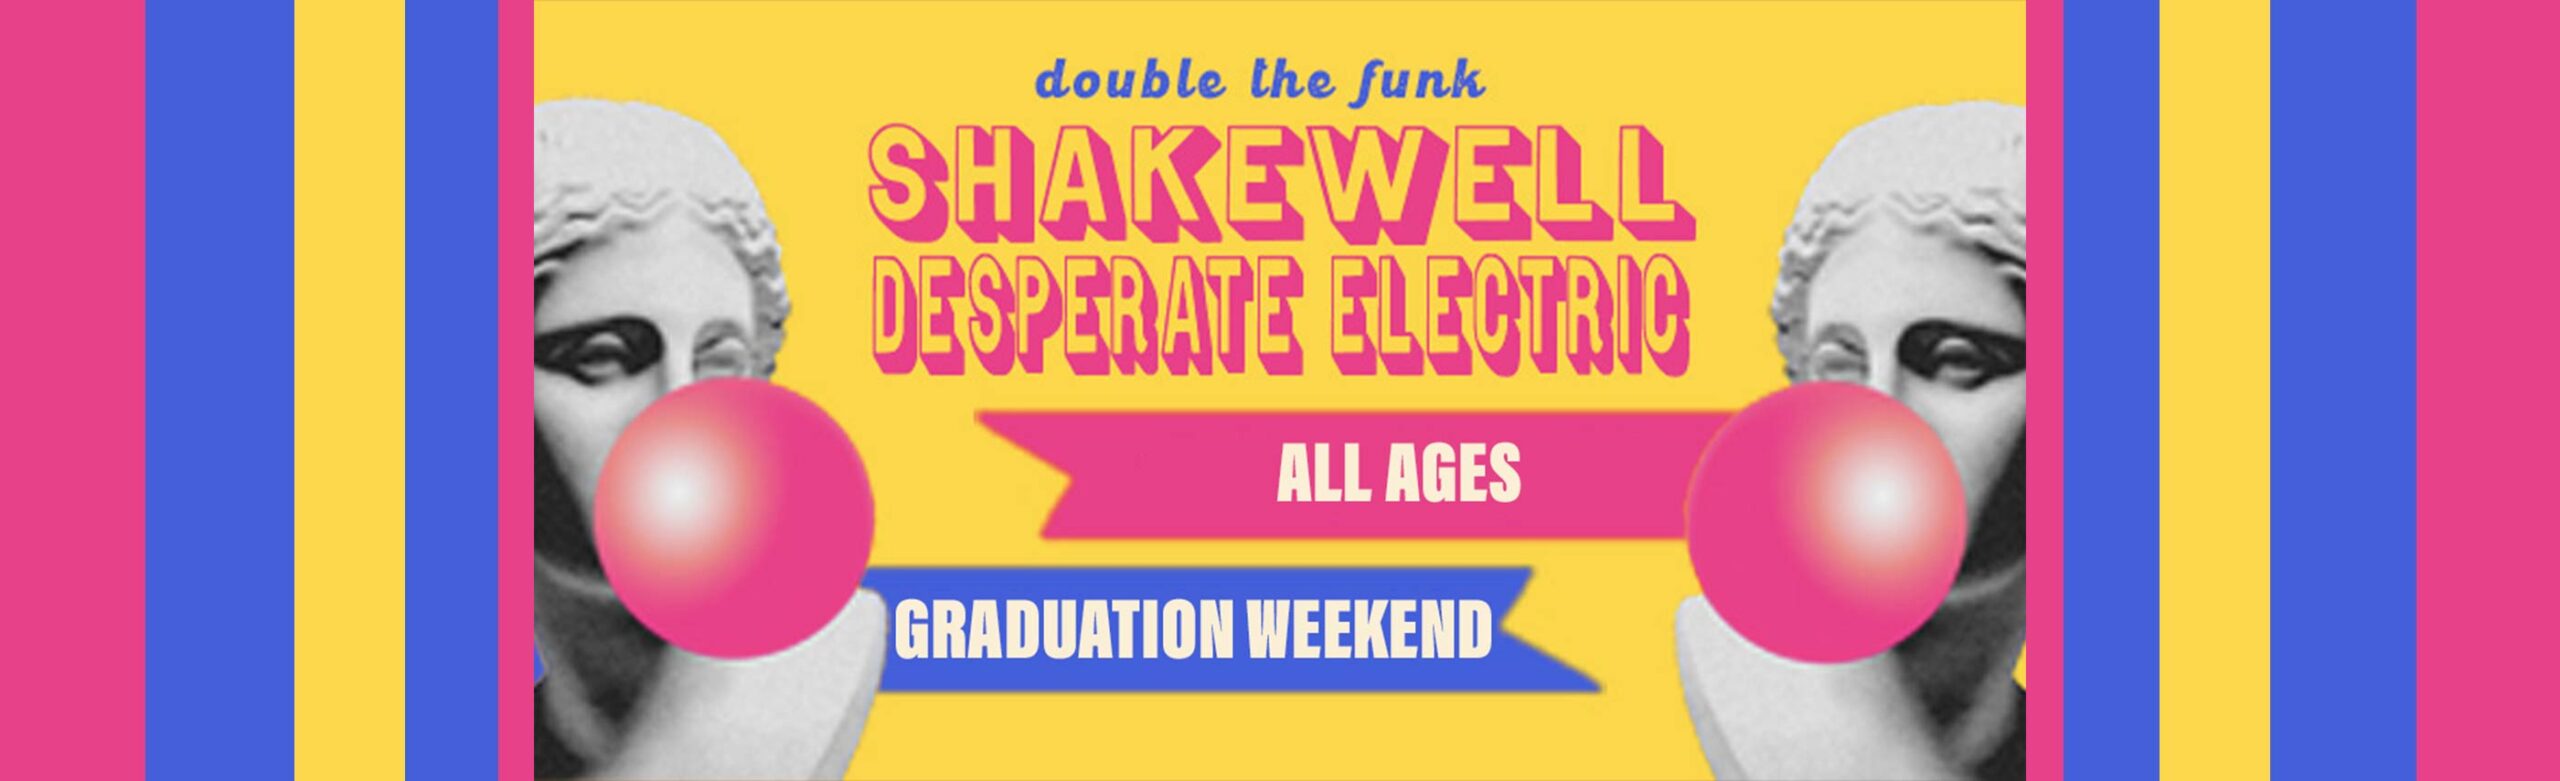 Shakewell x Desperate Electric